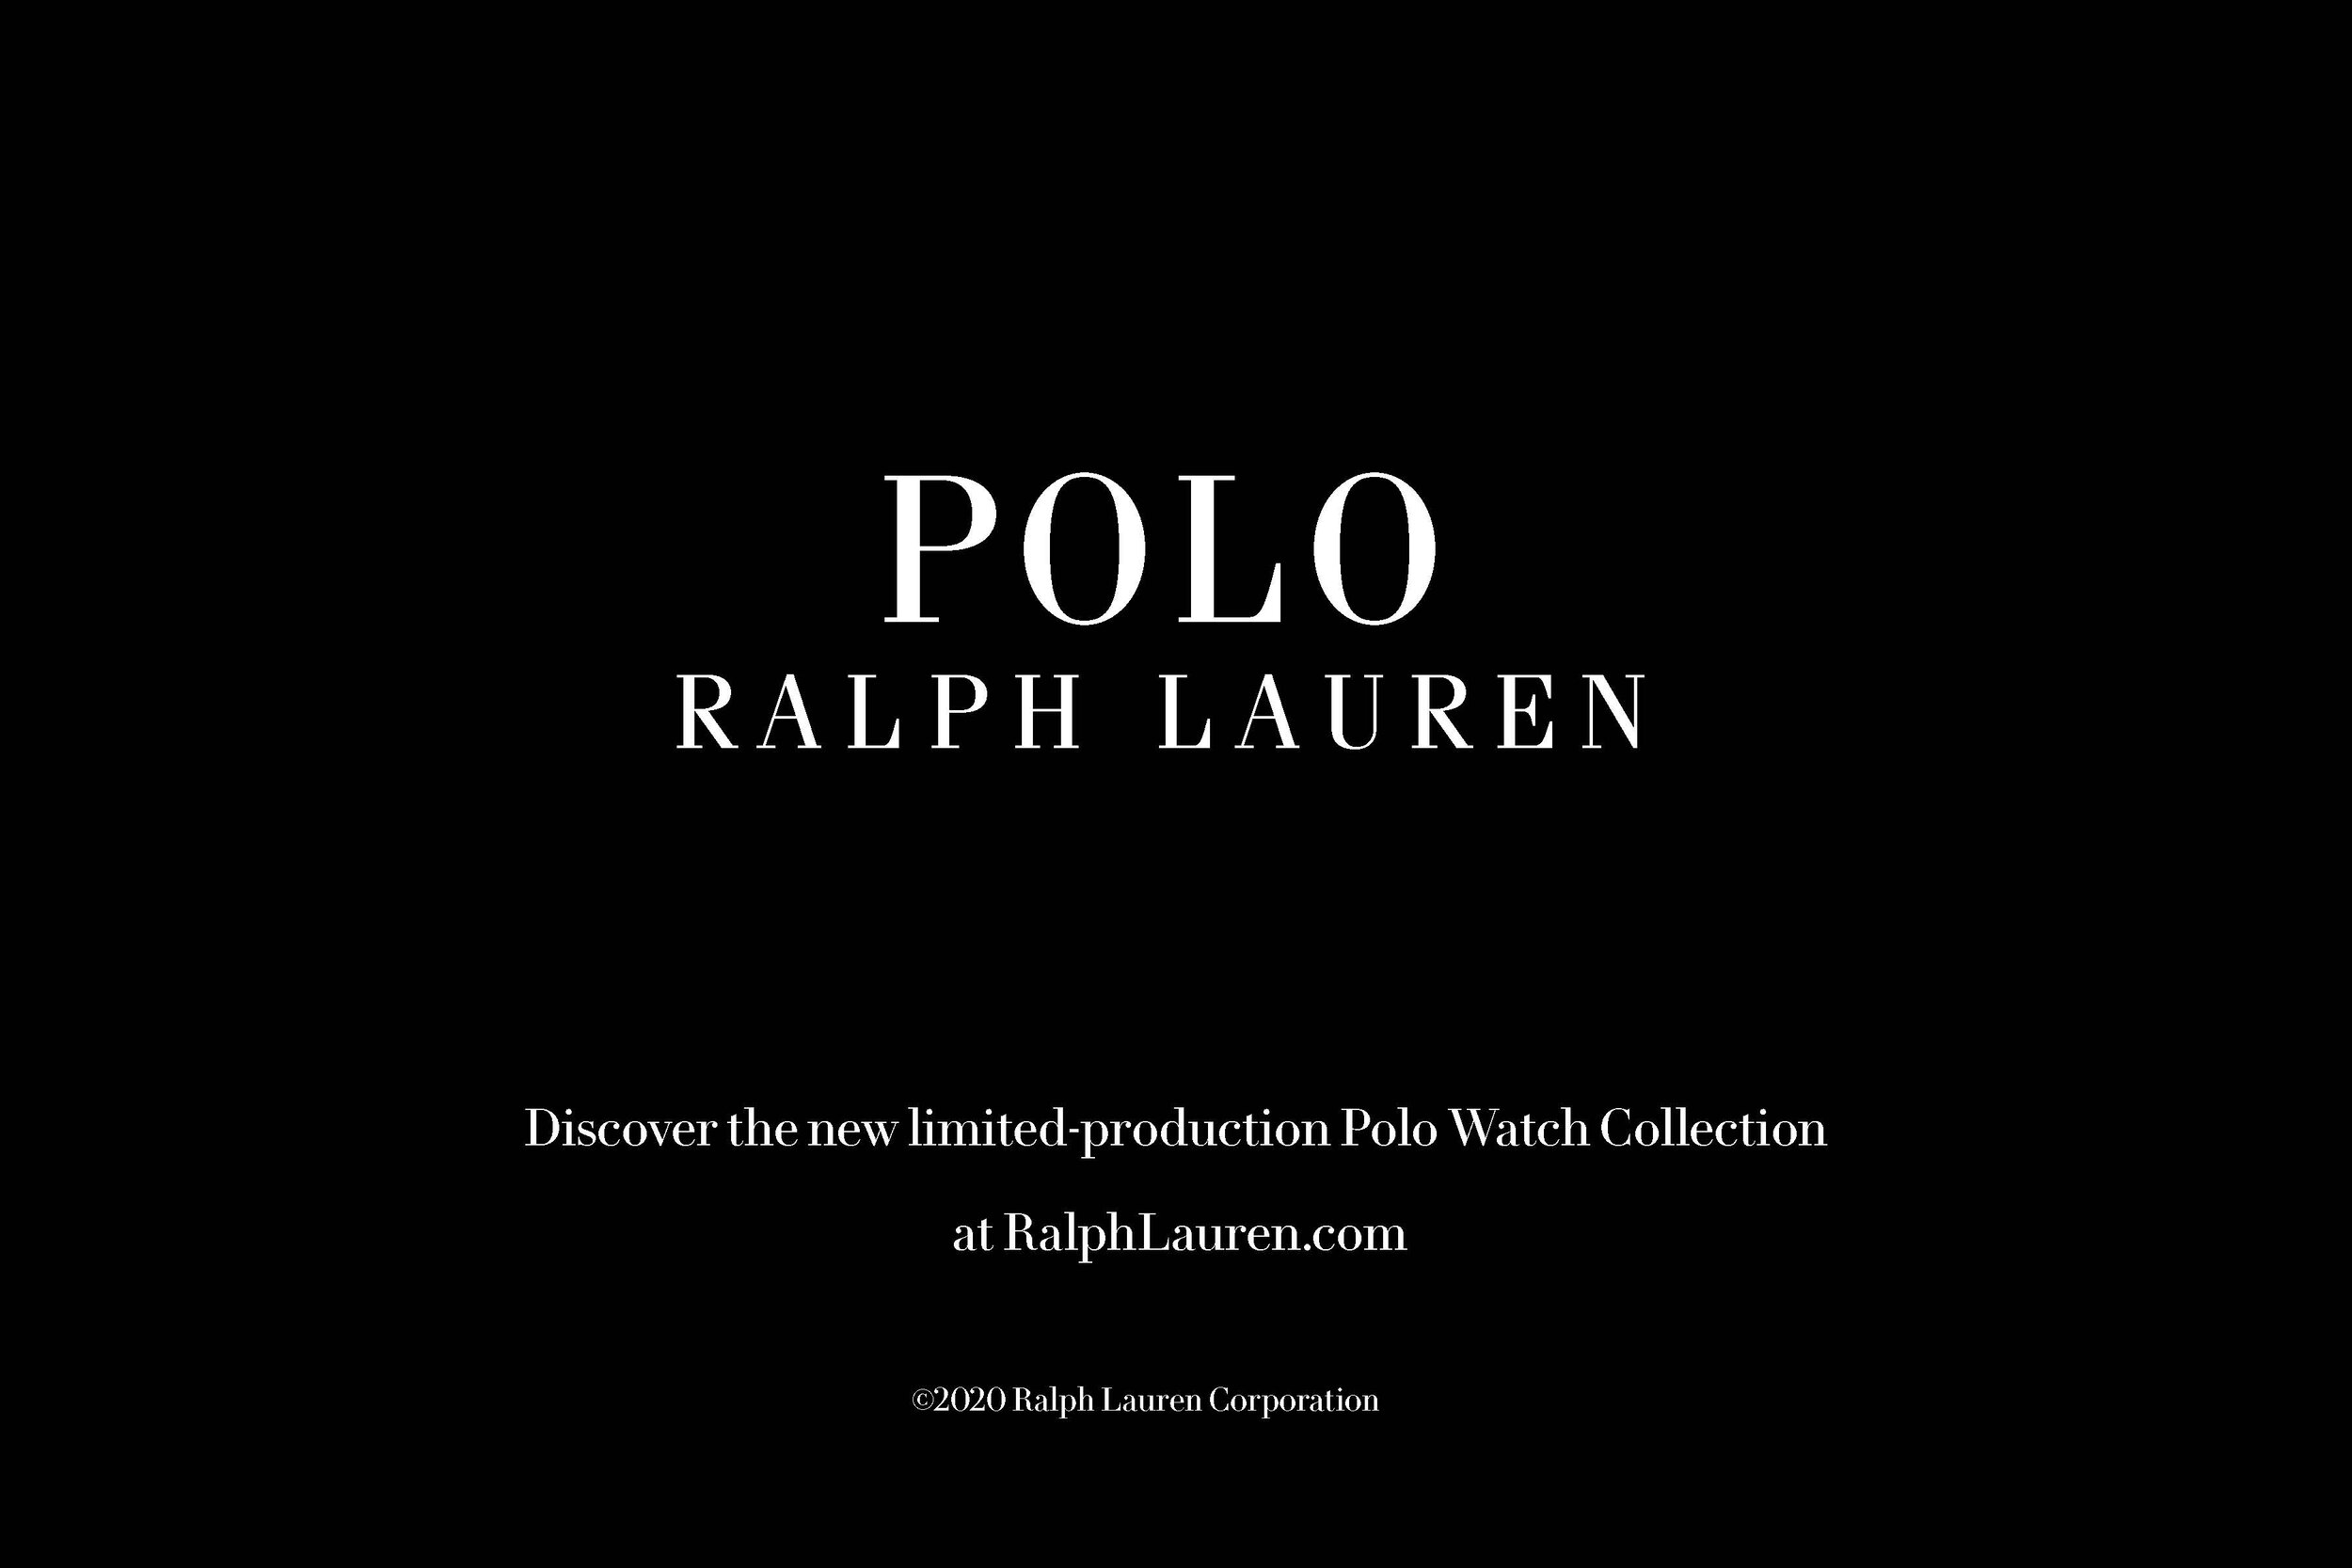 POLO WATCH FINAL STATIC MAILER 9.1[2]_Page_23.jpg